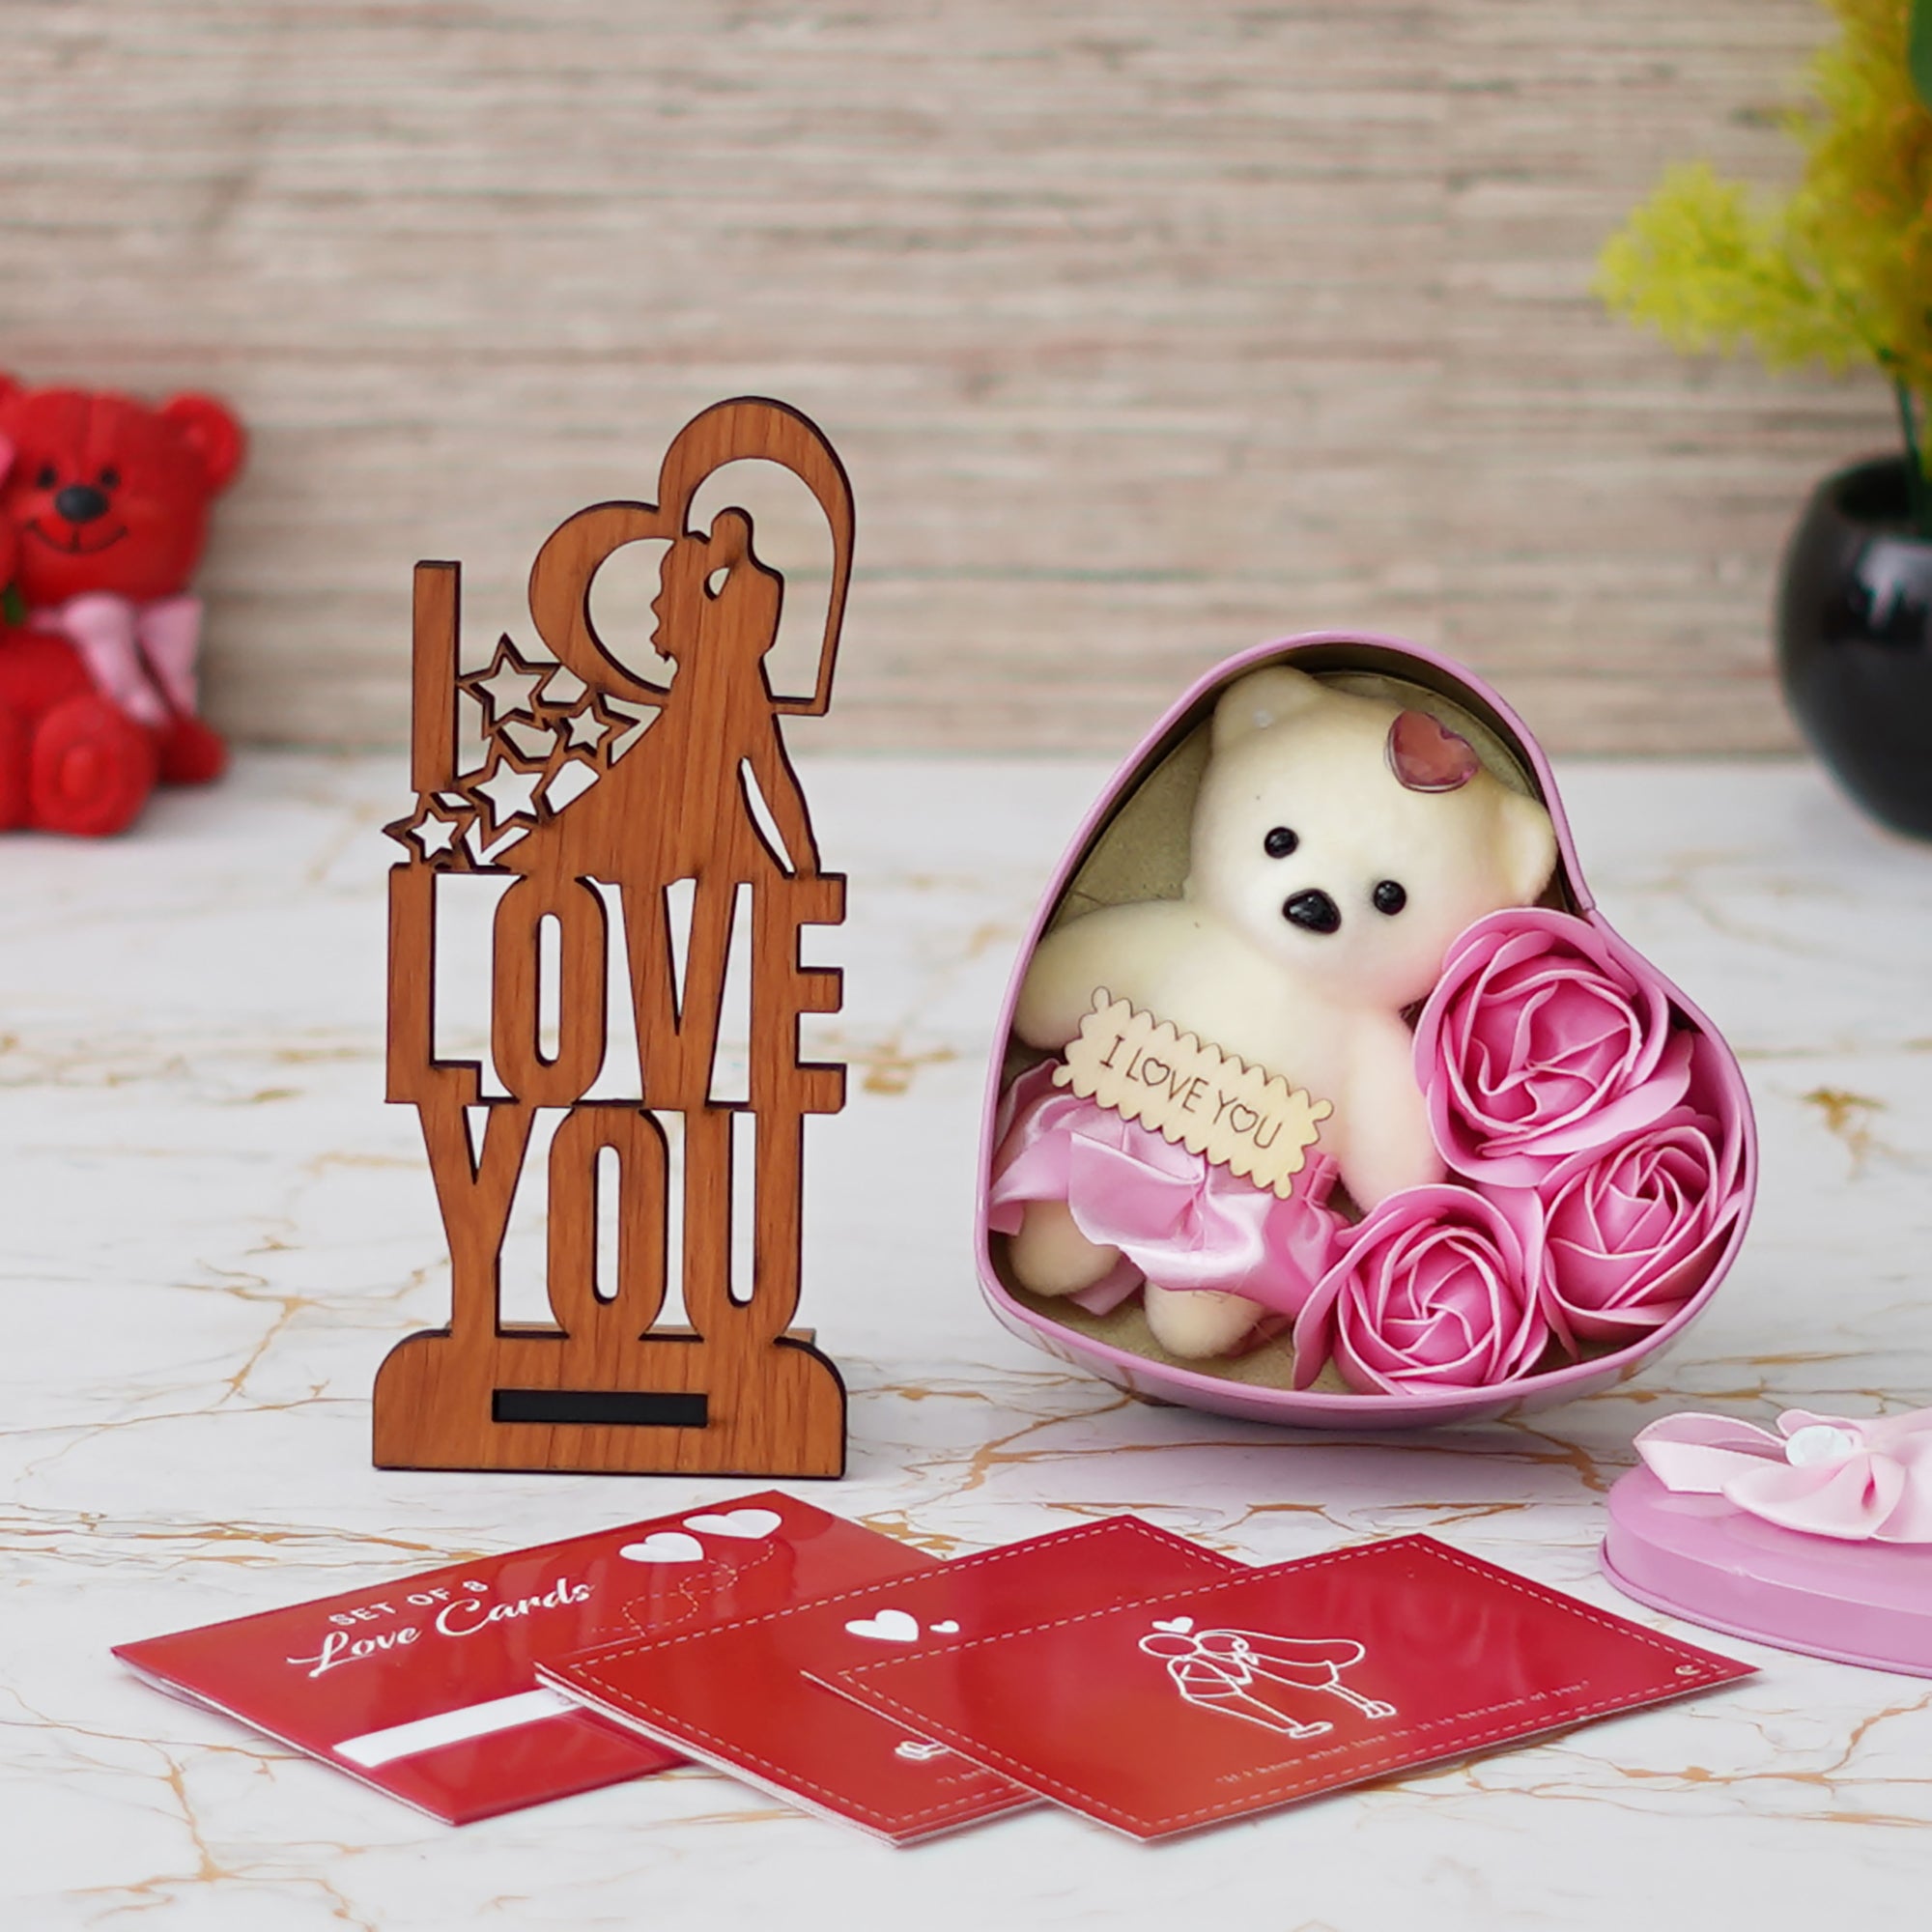 Valentine Combo of Set of 8 Love Post Cards Gift Cards Set, "Love You" Wooden Showpiece With Stand, Pink Heart Shaped Gift Box with Teddy and Roses